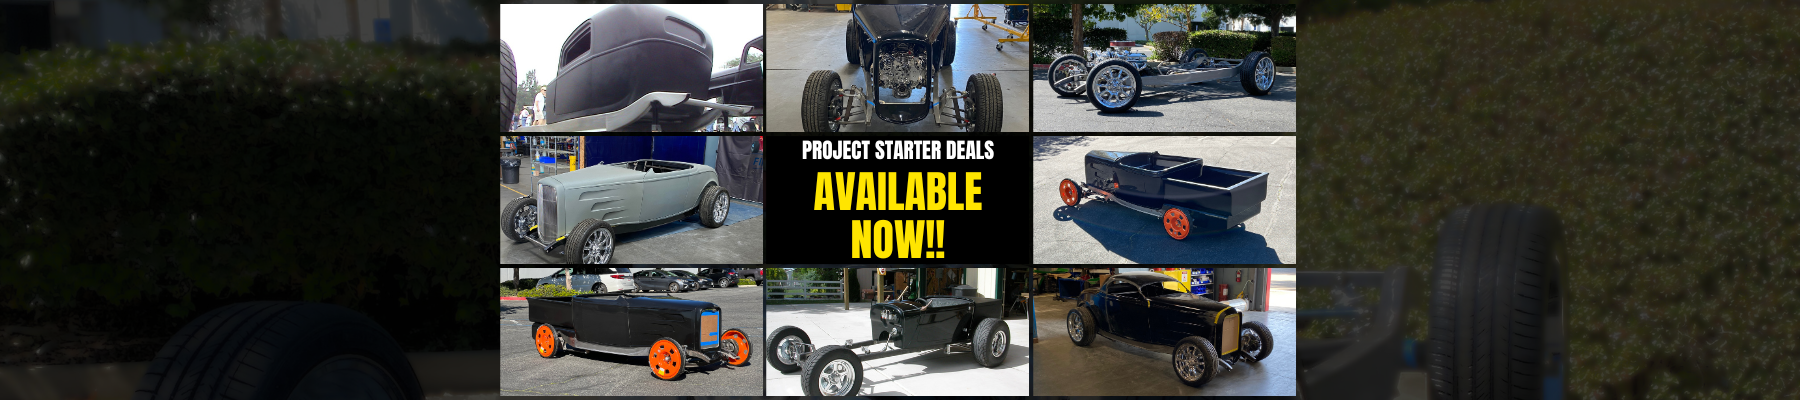 Hot Rod Project Starter Deals Available Now!!